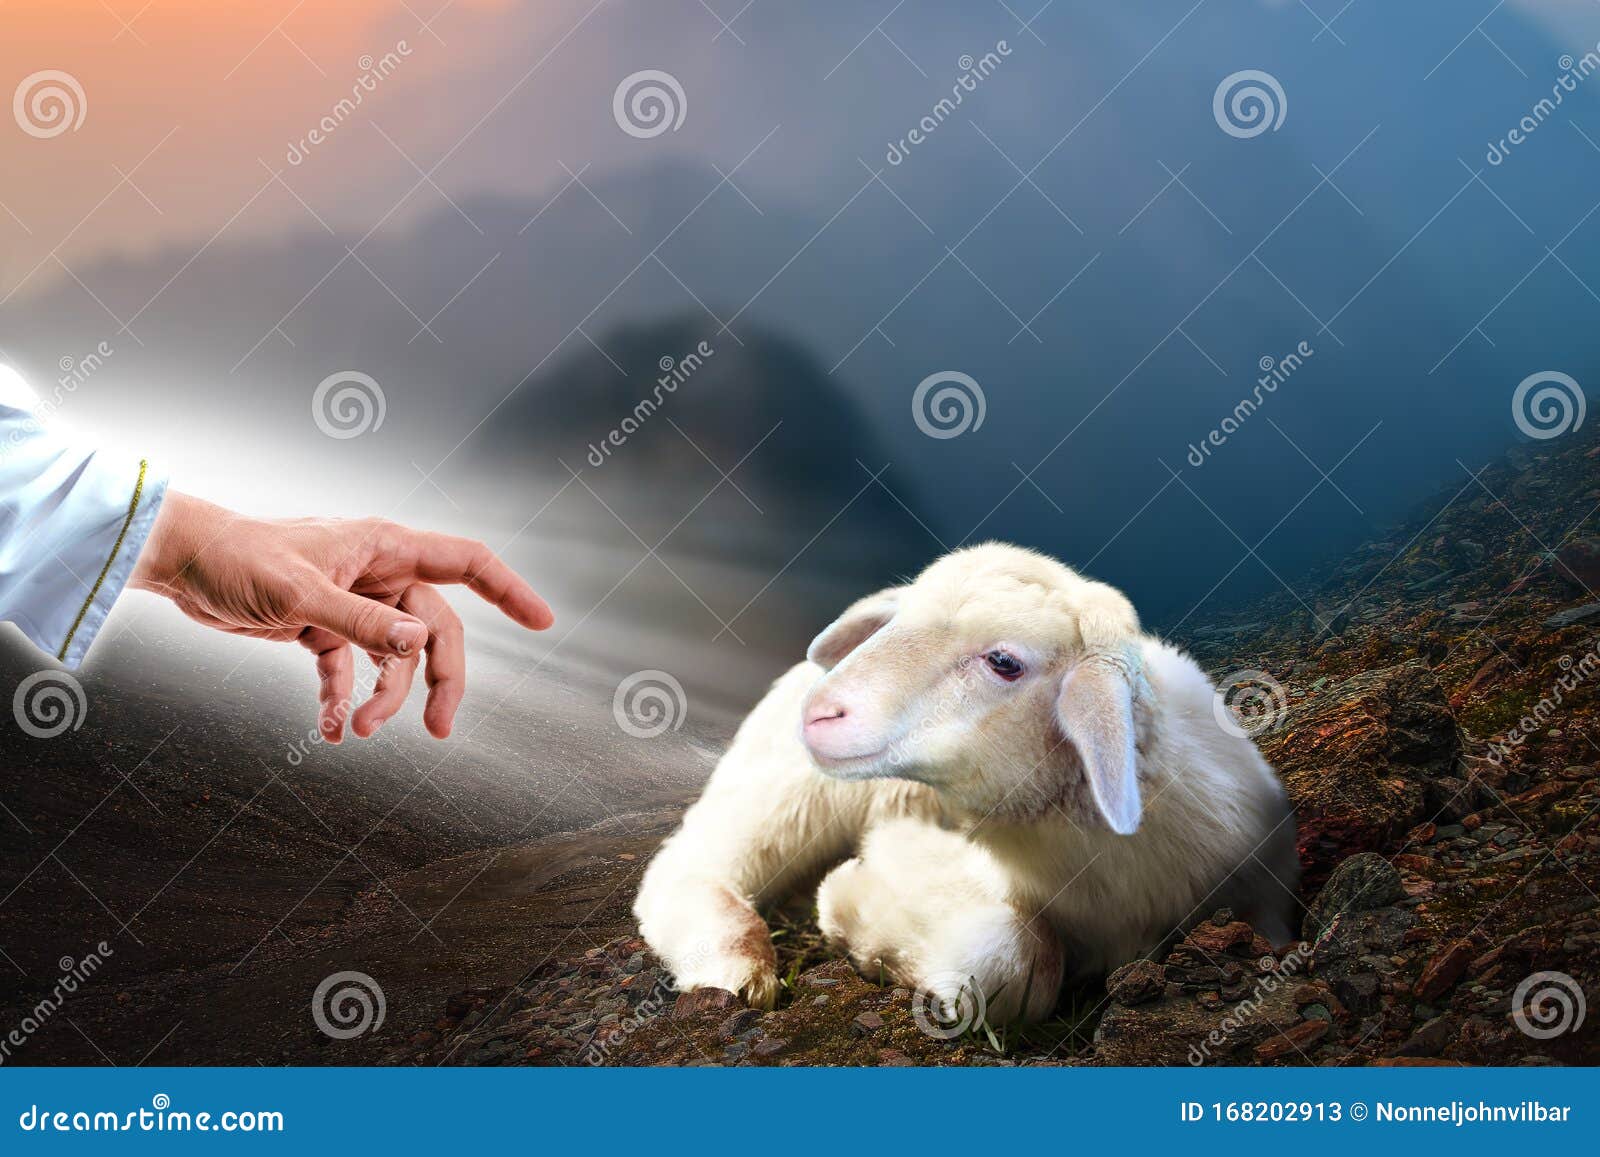 jesus hand reaching out to a lost sheep